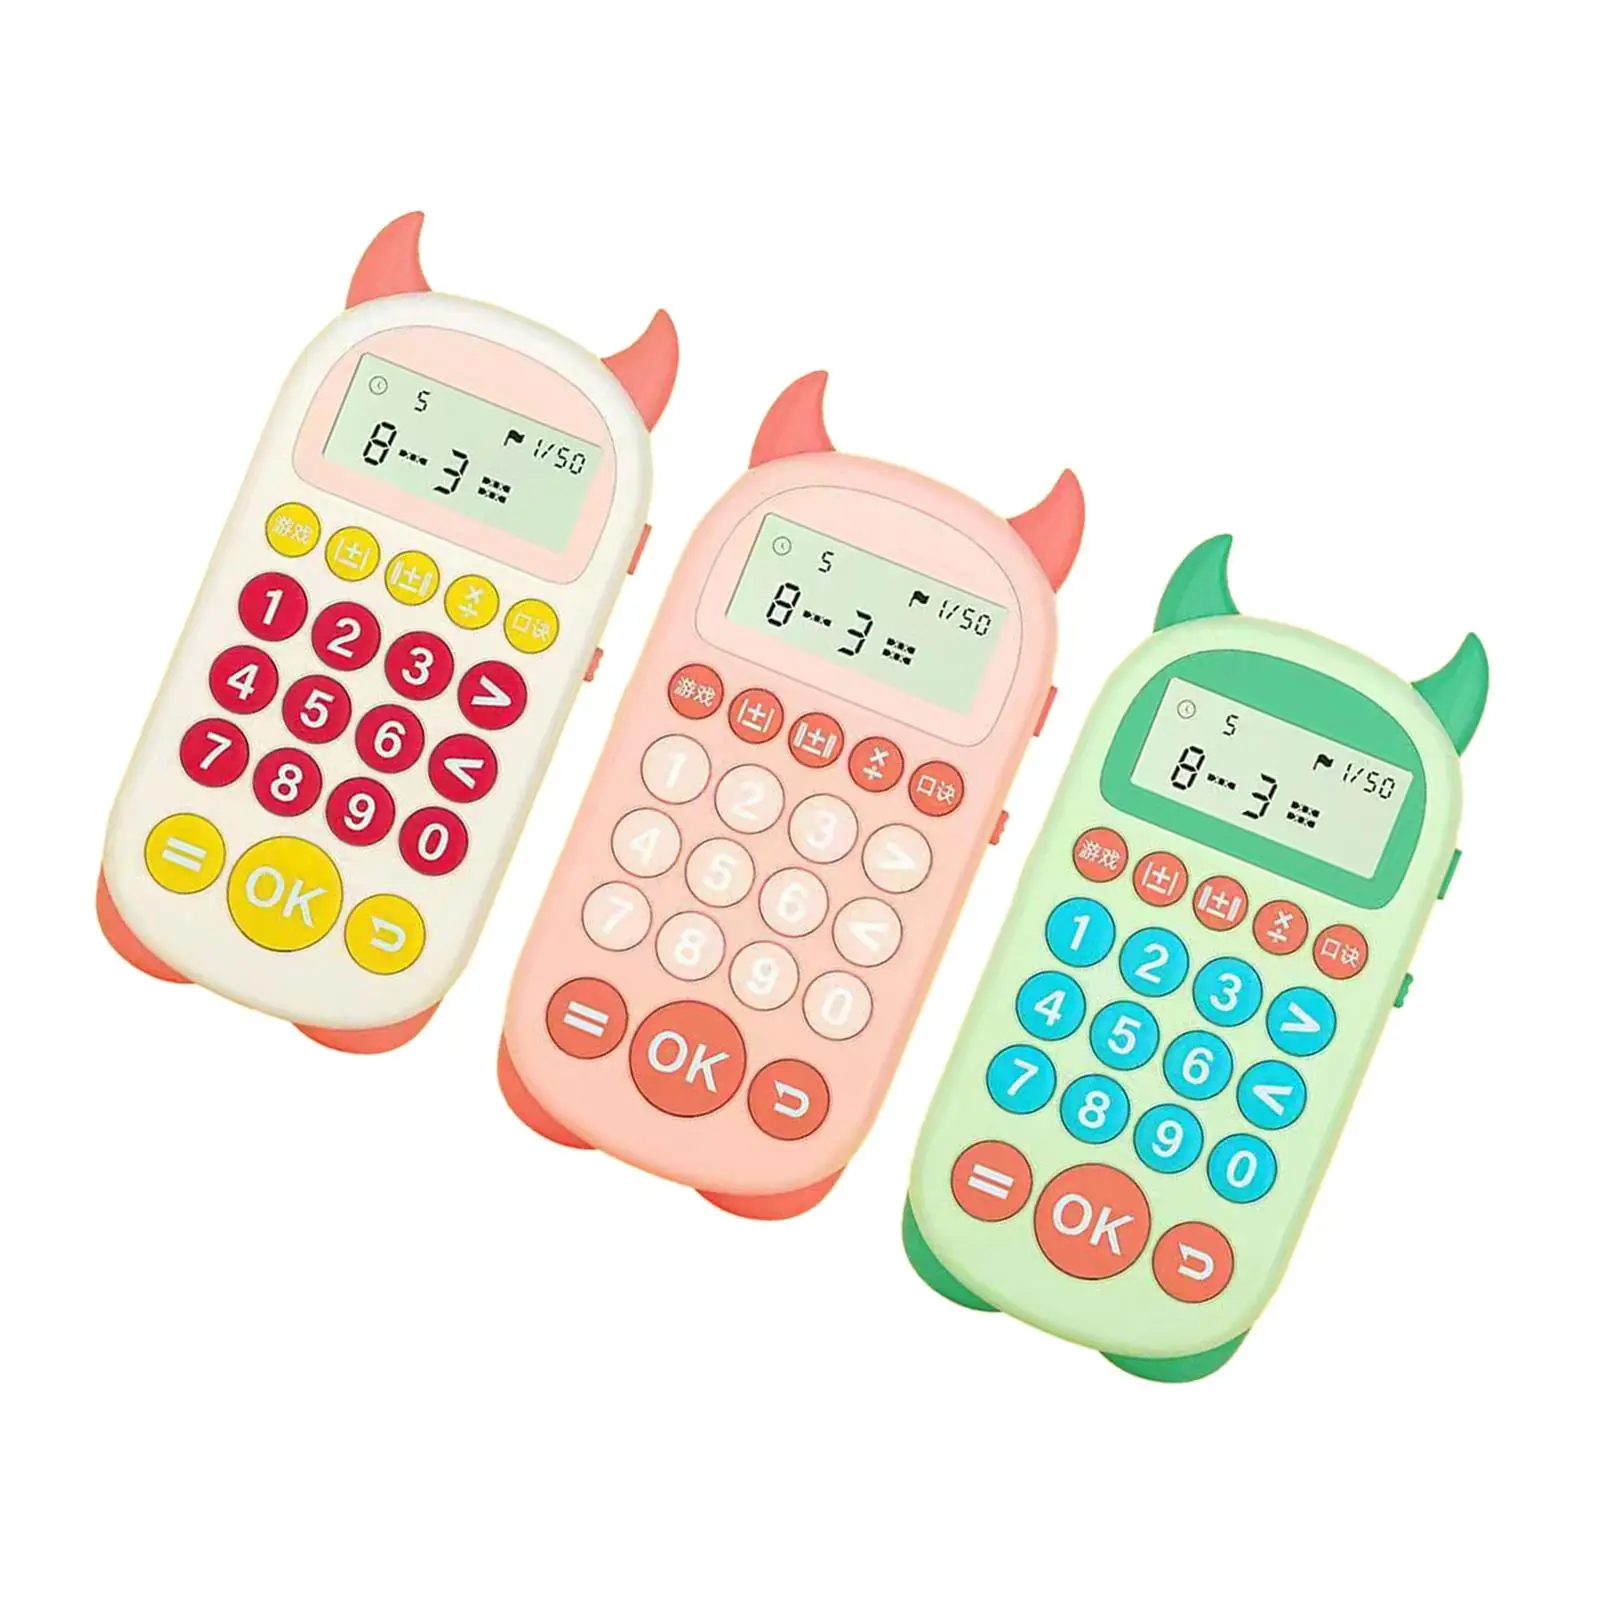 Portable Electronic Calculator Functional Math Calculation Teaching Aids Electronic Math Game for Students Toddler Children Kids